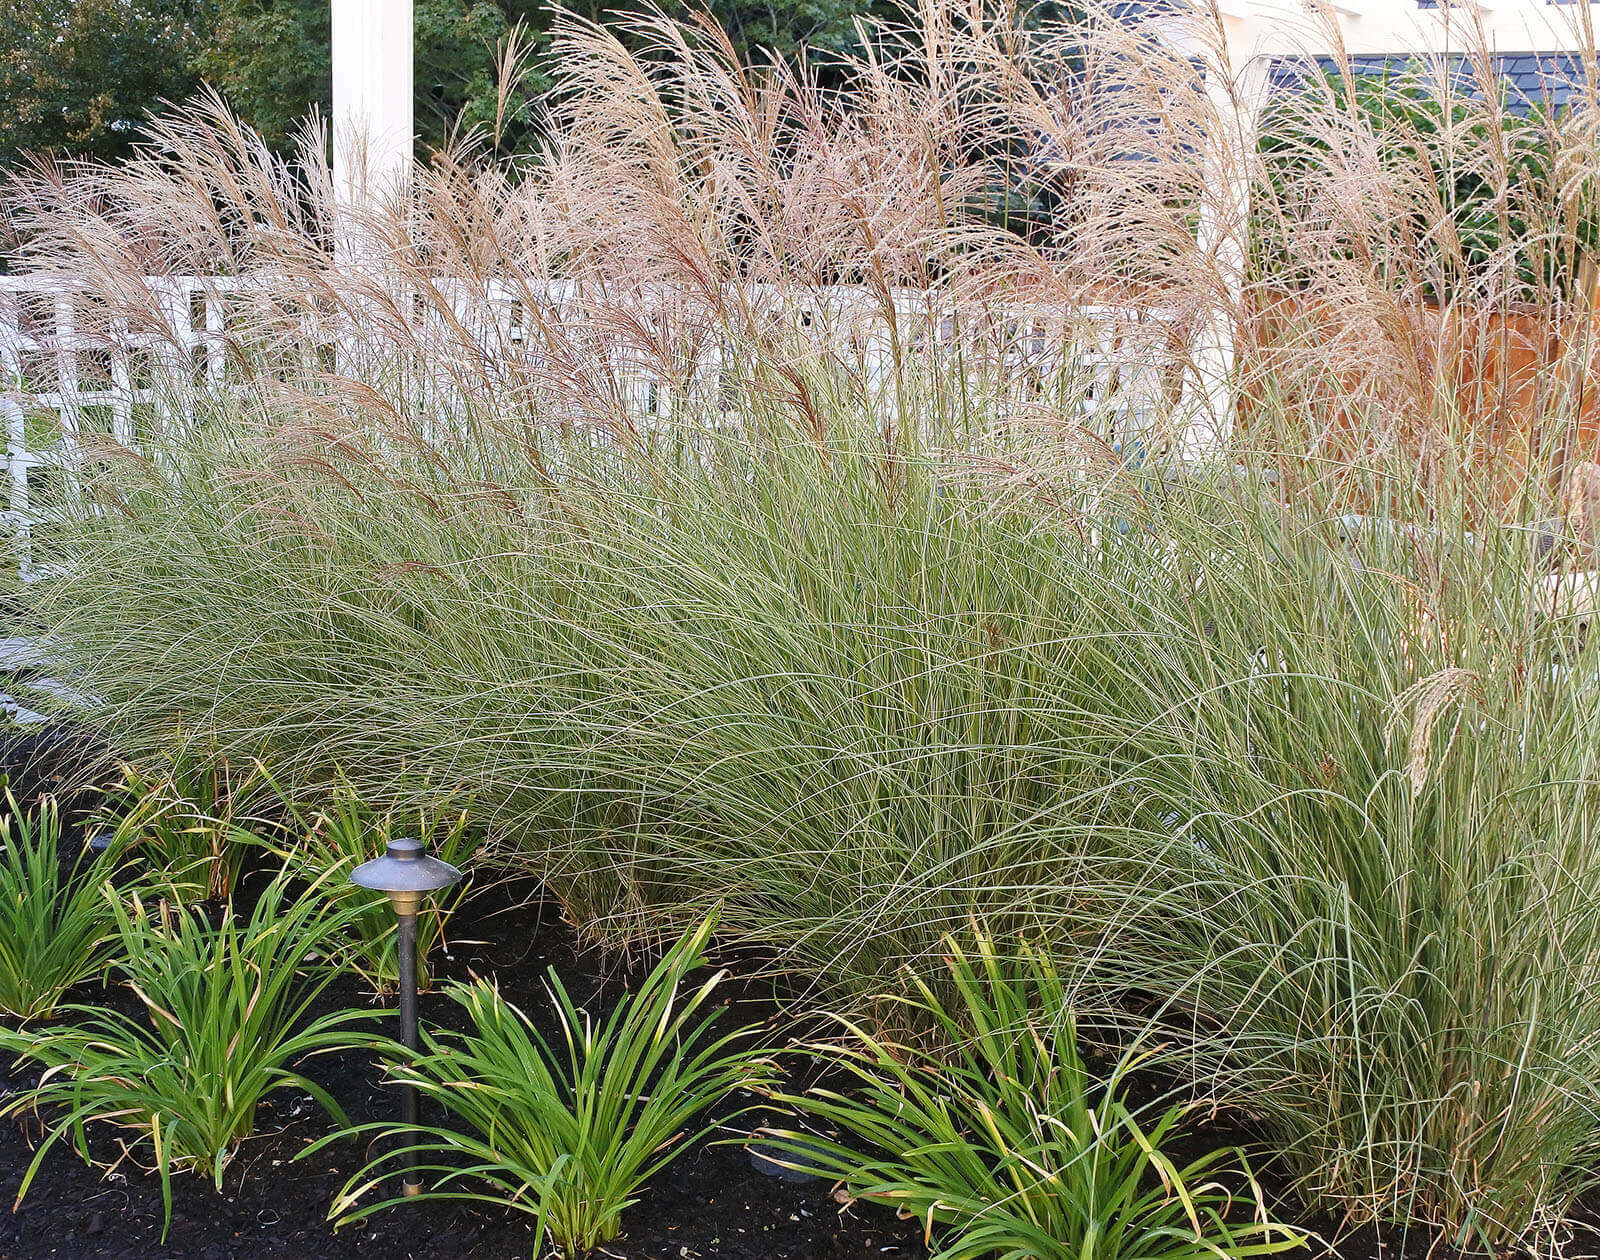 Tall reed grass with small flowering plants in garden bed next to white fencing